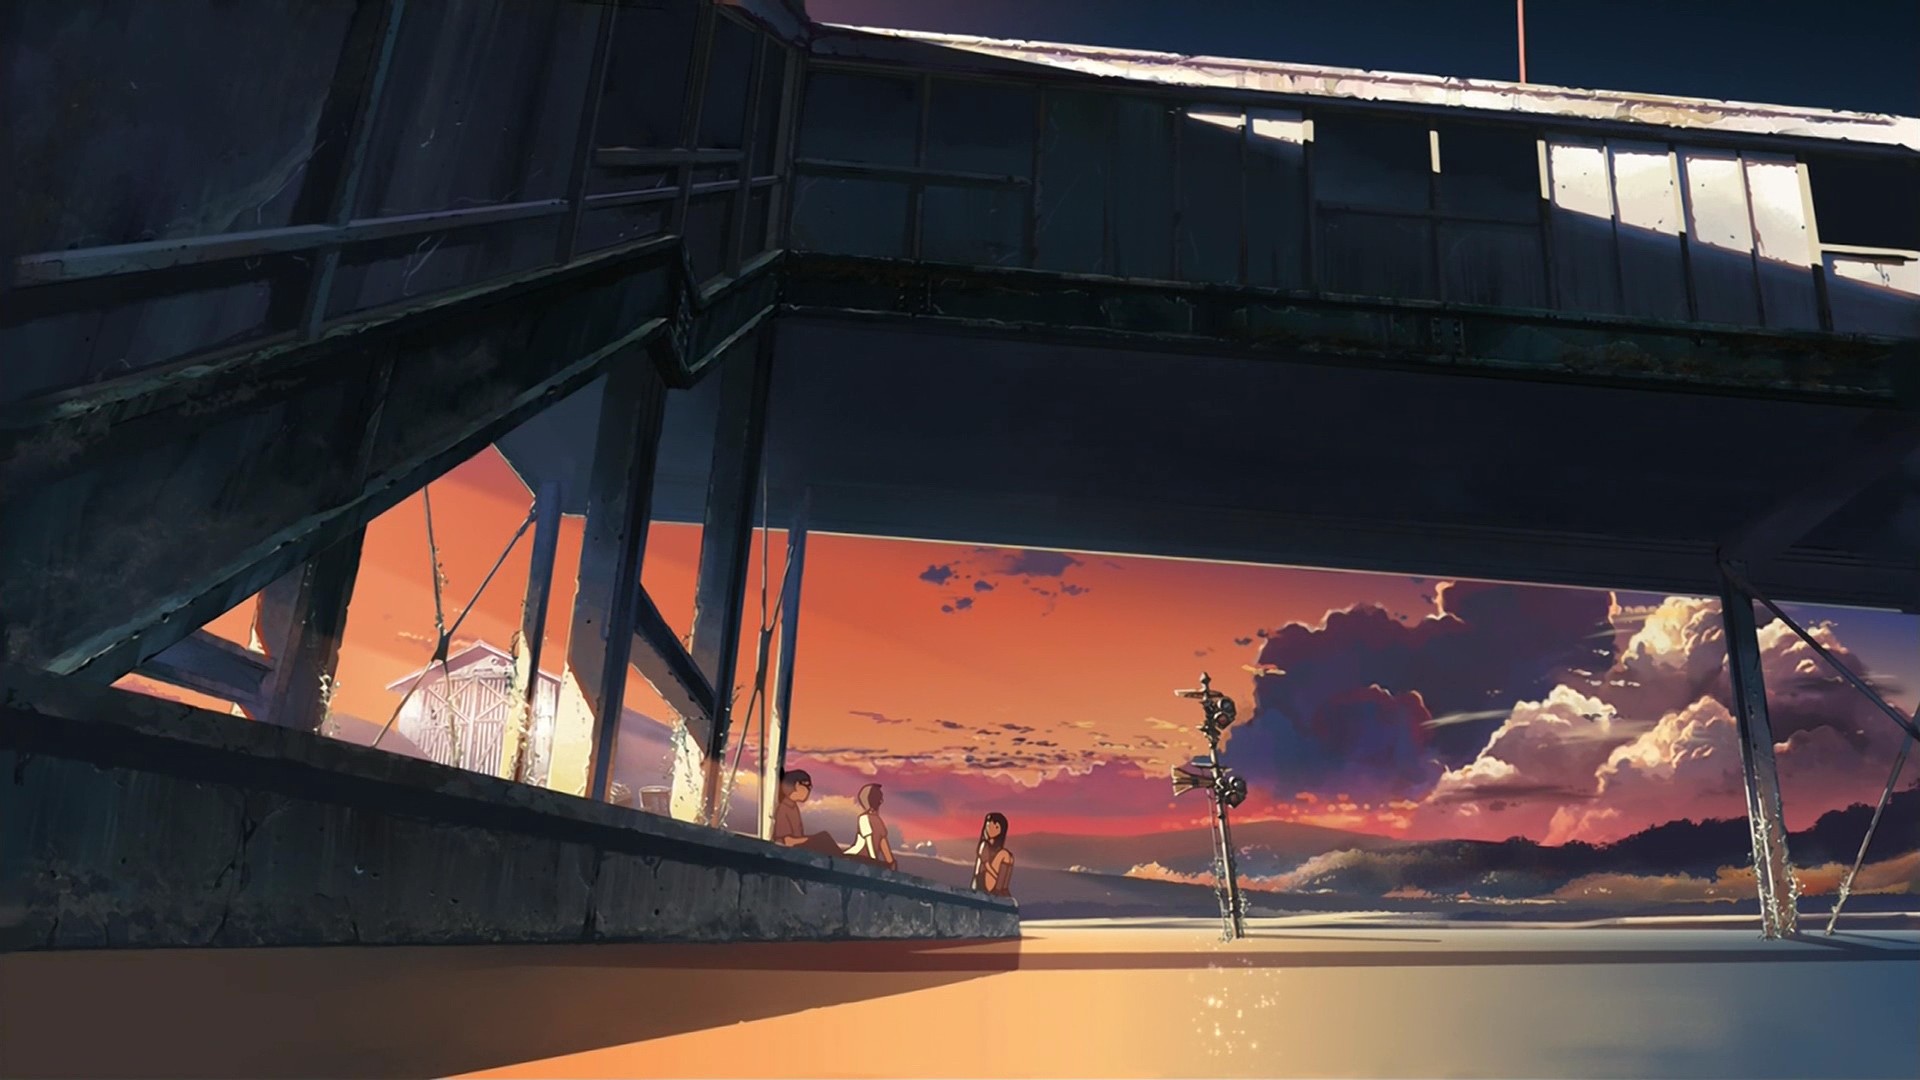 General 1920x1080 anime sky outdoors urban sitting clouds